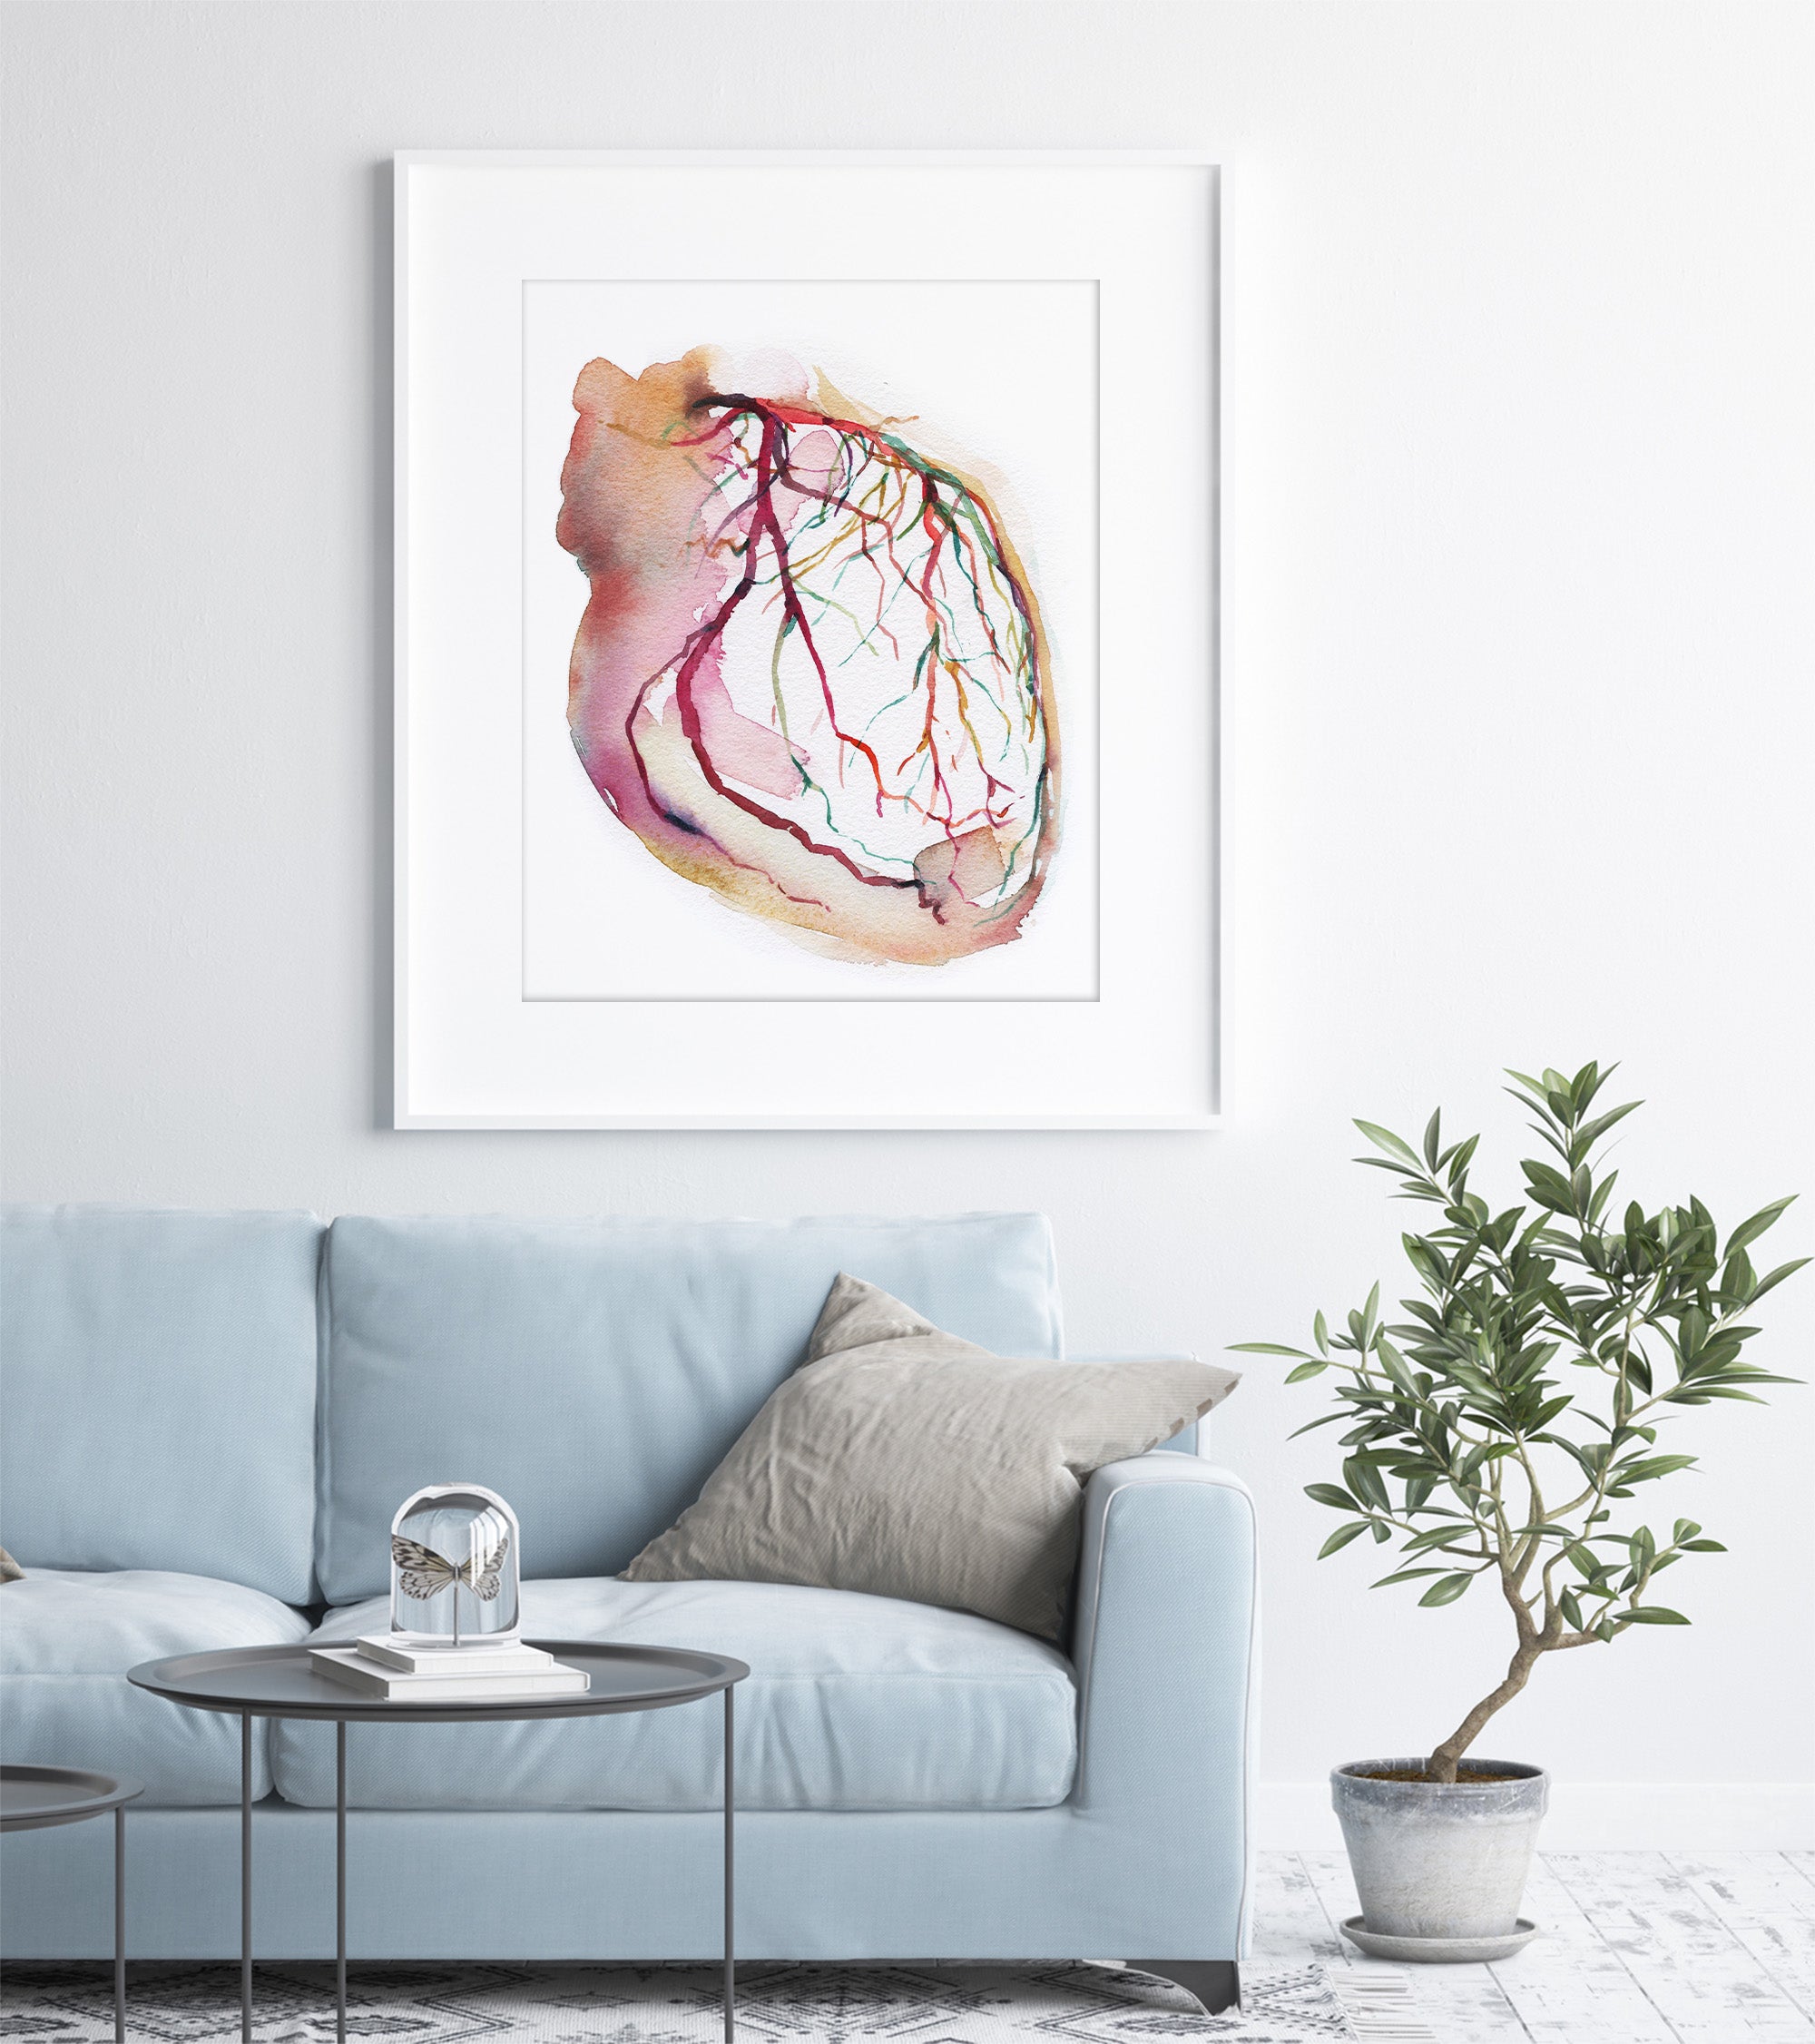 Framed watercolor painting showing a coronary angiogram x-ray image in reds, purples, greens, oranges and yellows. The painting is hanging over a blue couch.